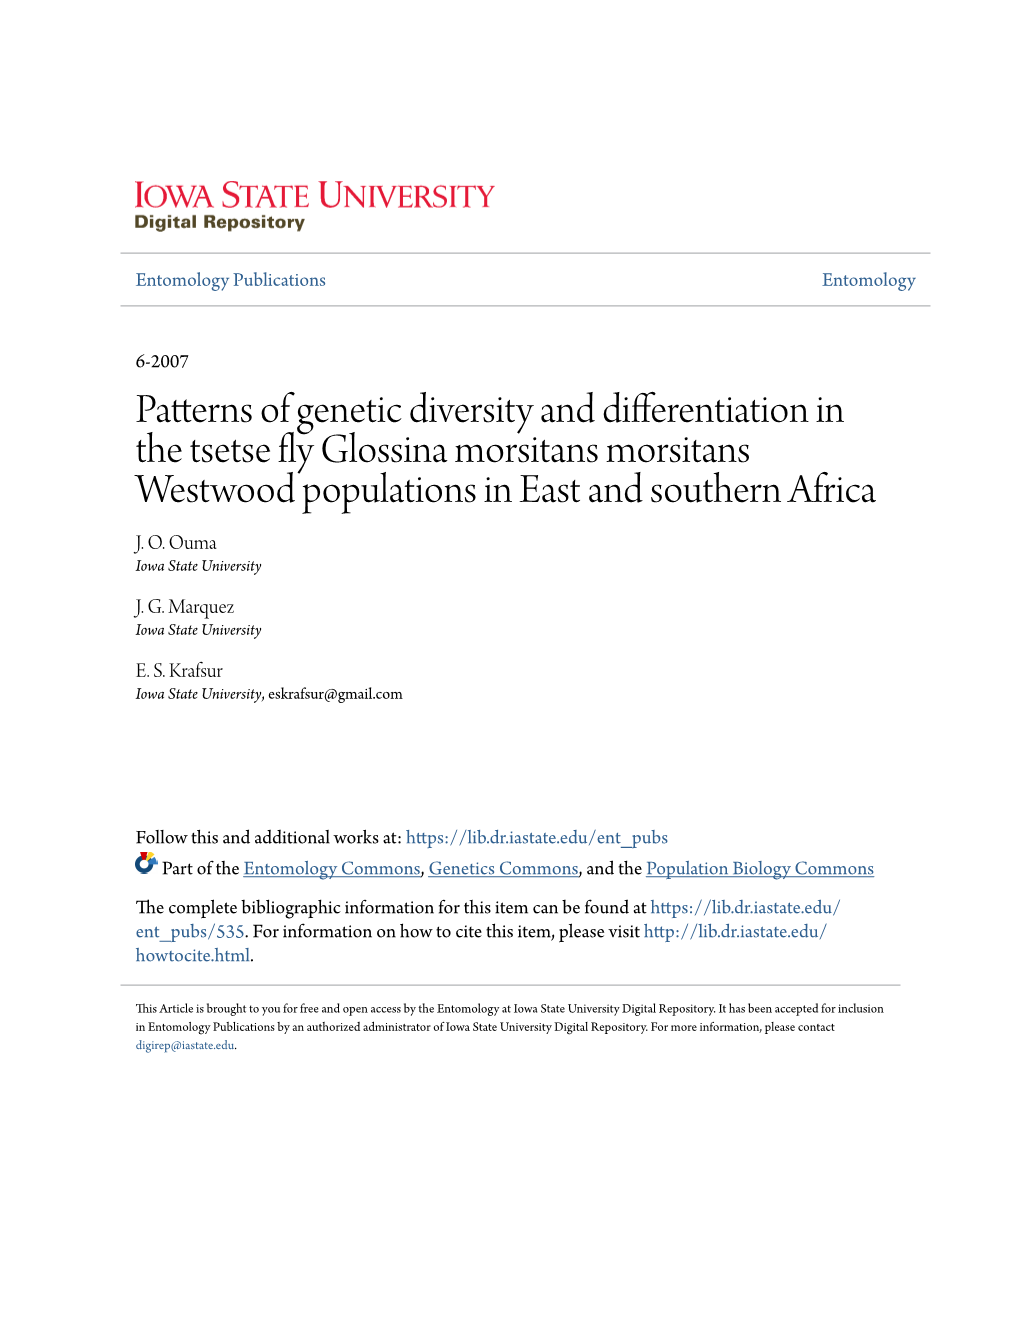 Patterns of Genetic Diversity and Differentiation in the Tsetse Fly Glossina Morsitans Morsitans Westwood Populations in East and Southern Africa J